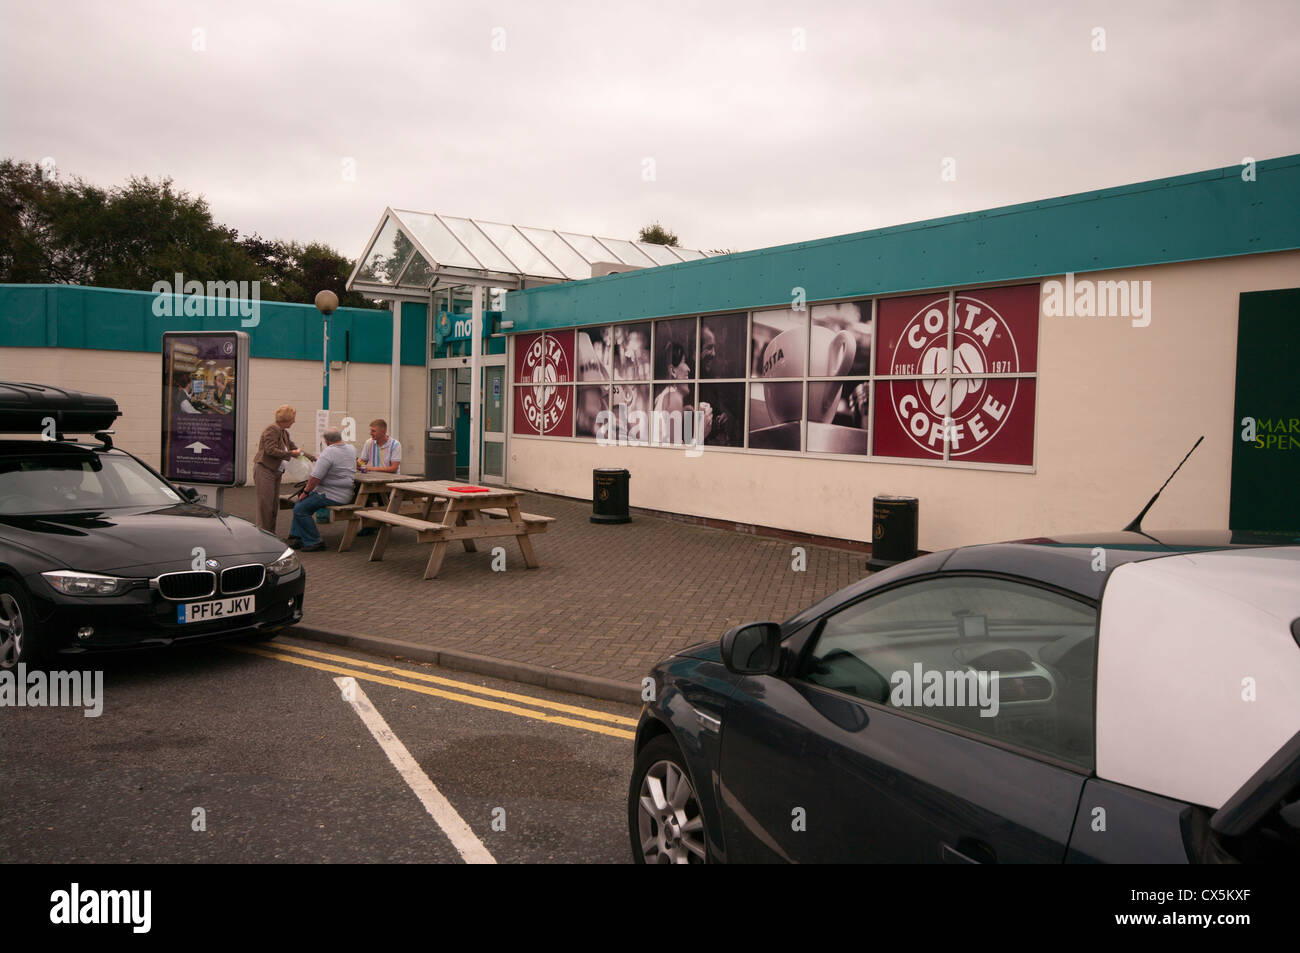 Costa Coffee Shop At A Moto Motorway Services UK Stock Photo